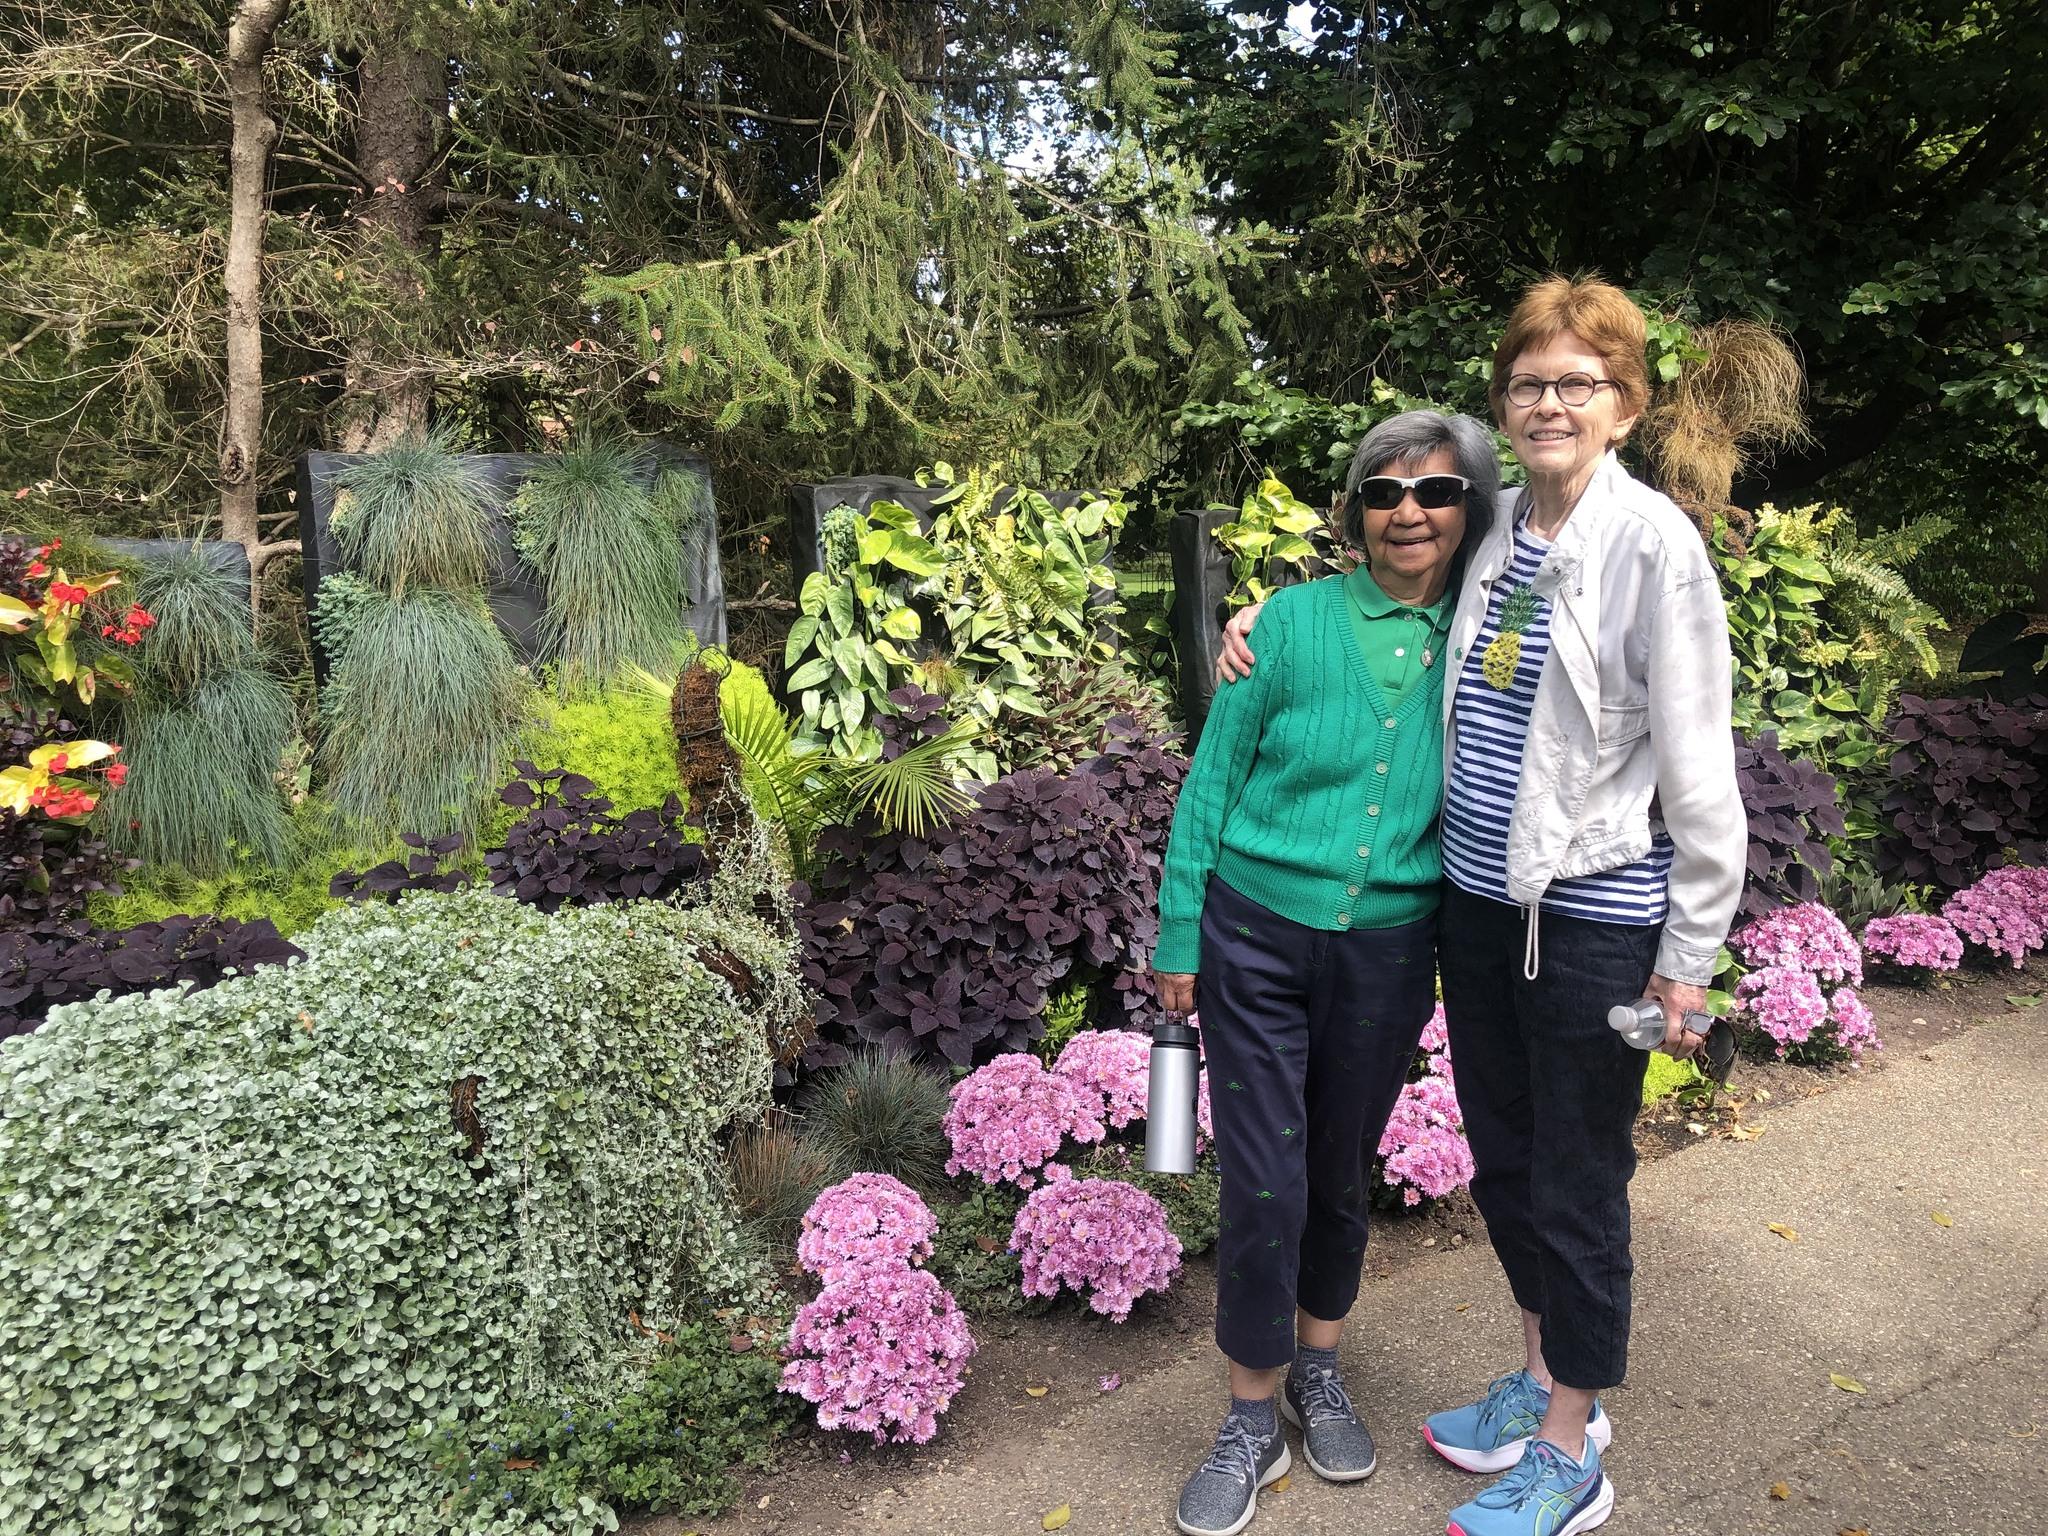 Two smiling women standing together in a lush garden with pink hydrangeas.